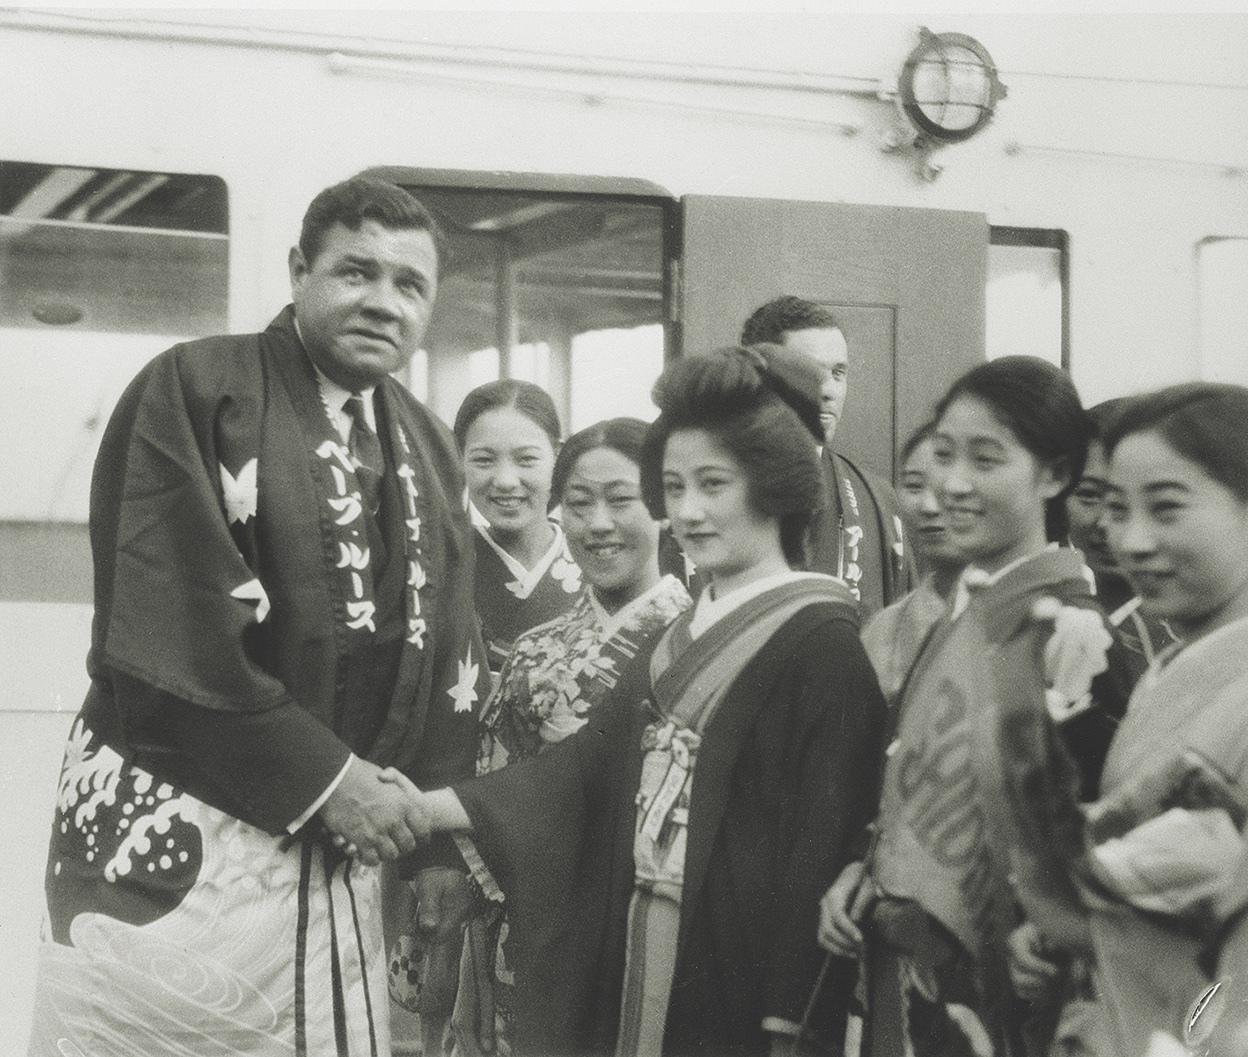 Babe Ruth with geishas during the 1934 tour of Japan. (Bettmann/Getty Images)